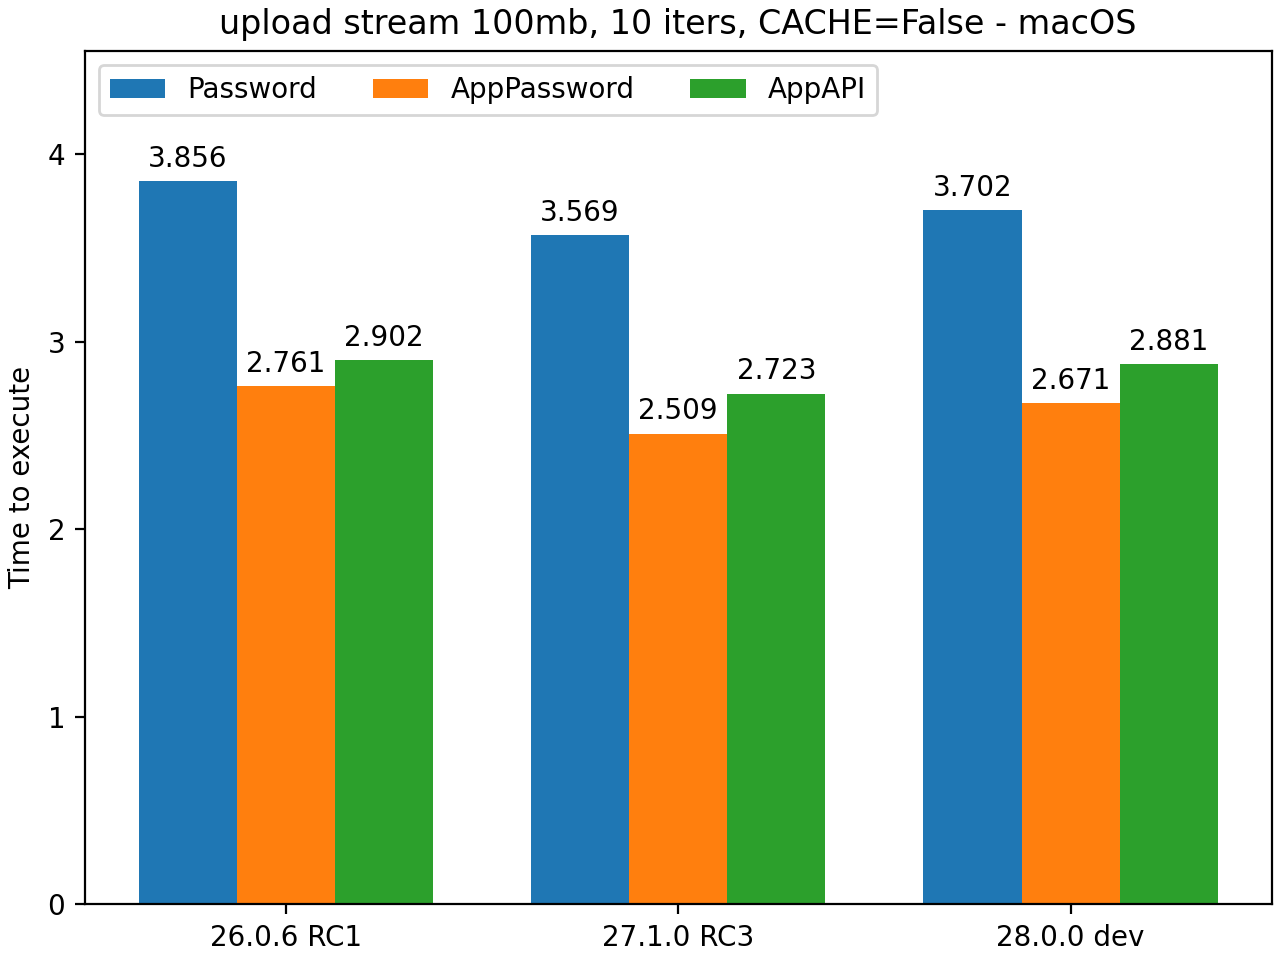 ../_images/dav_upload_stream_100mb__cache0_iters10__shurik.png